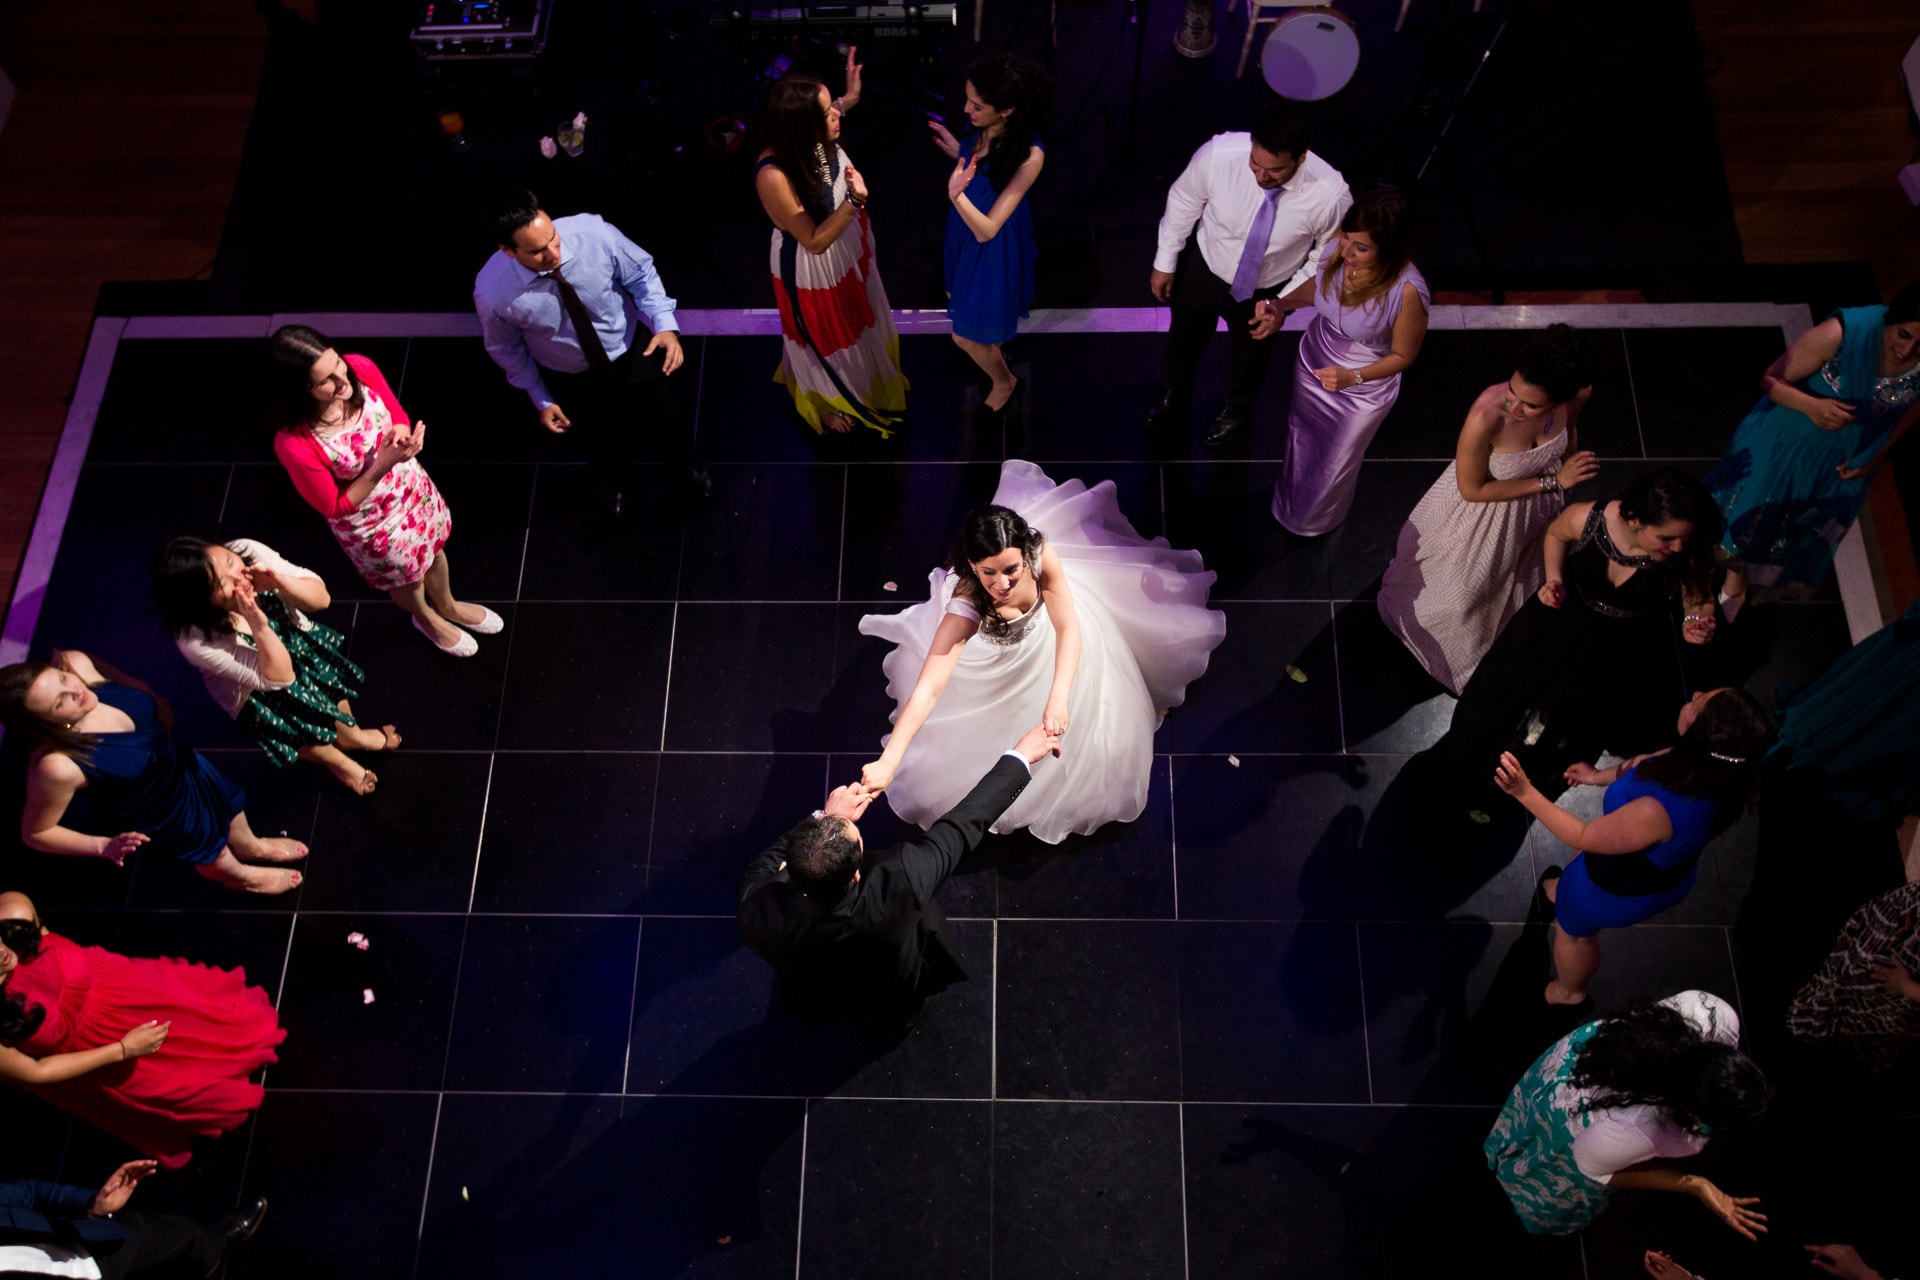 unusual angle on a first dance